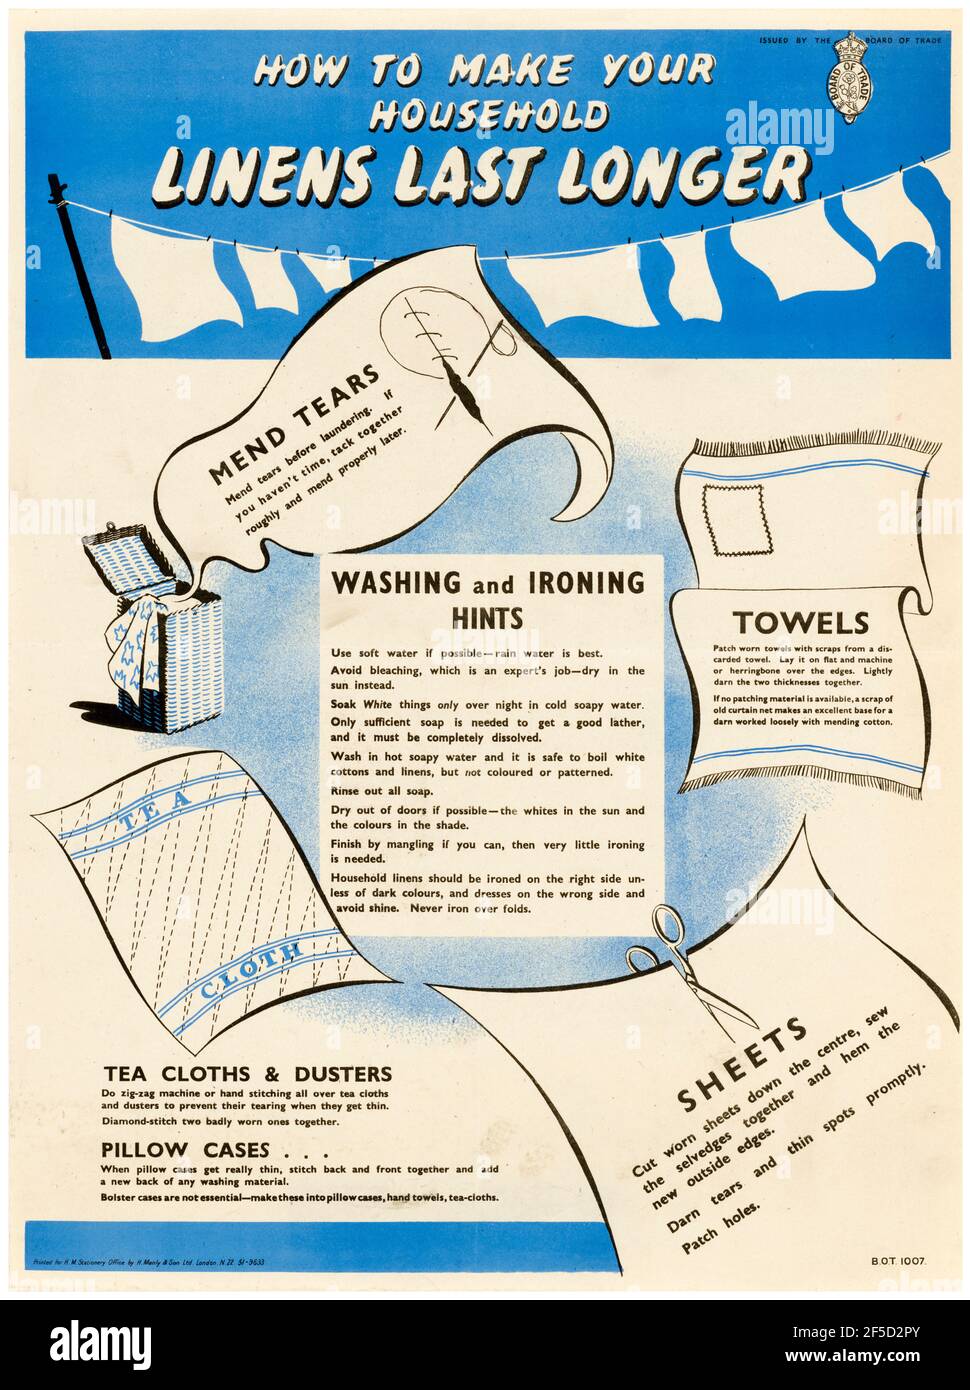 British, WW2, How To poster: Make Your Household Linens Last Longer, 1942-1945 Stock Photo